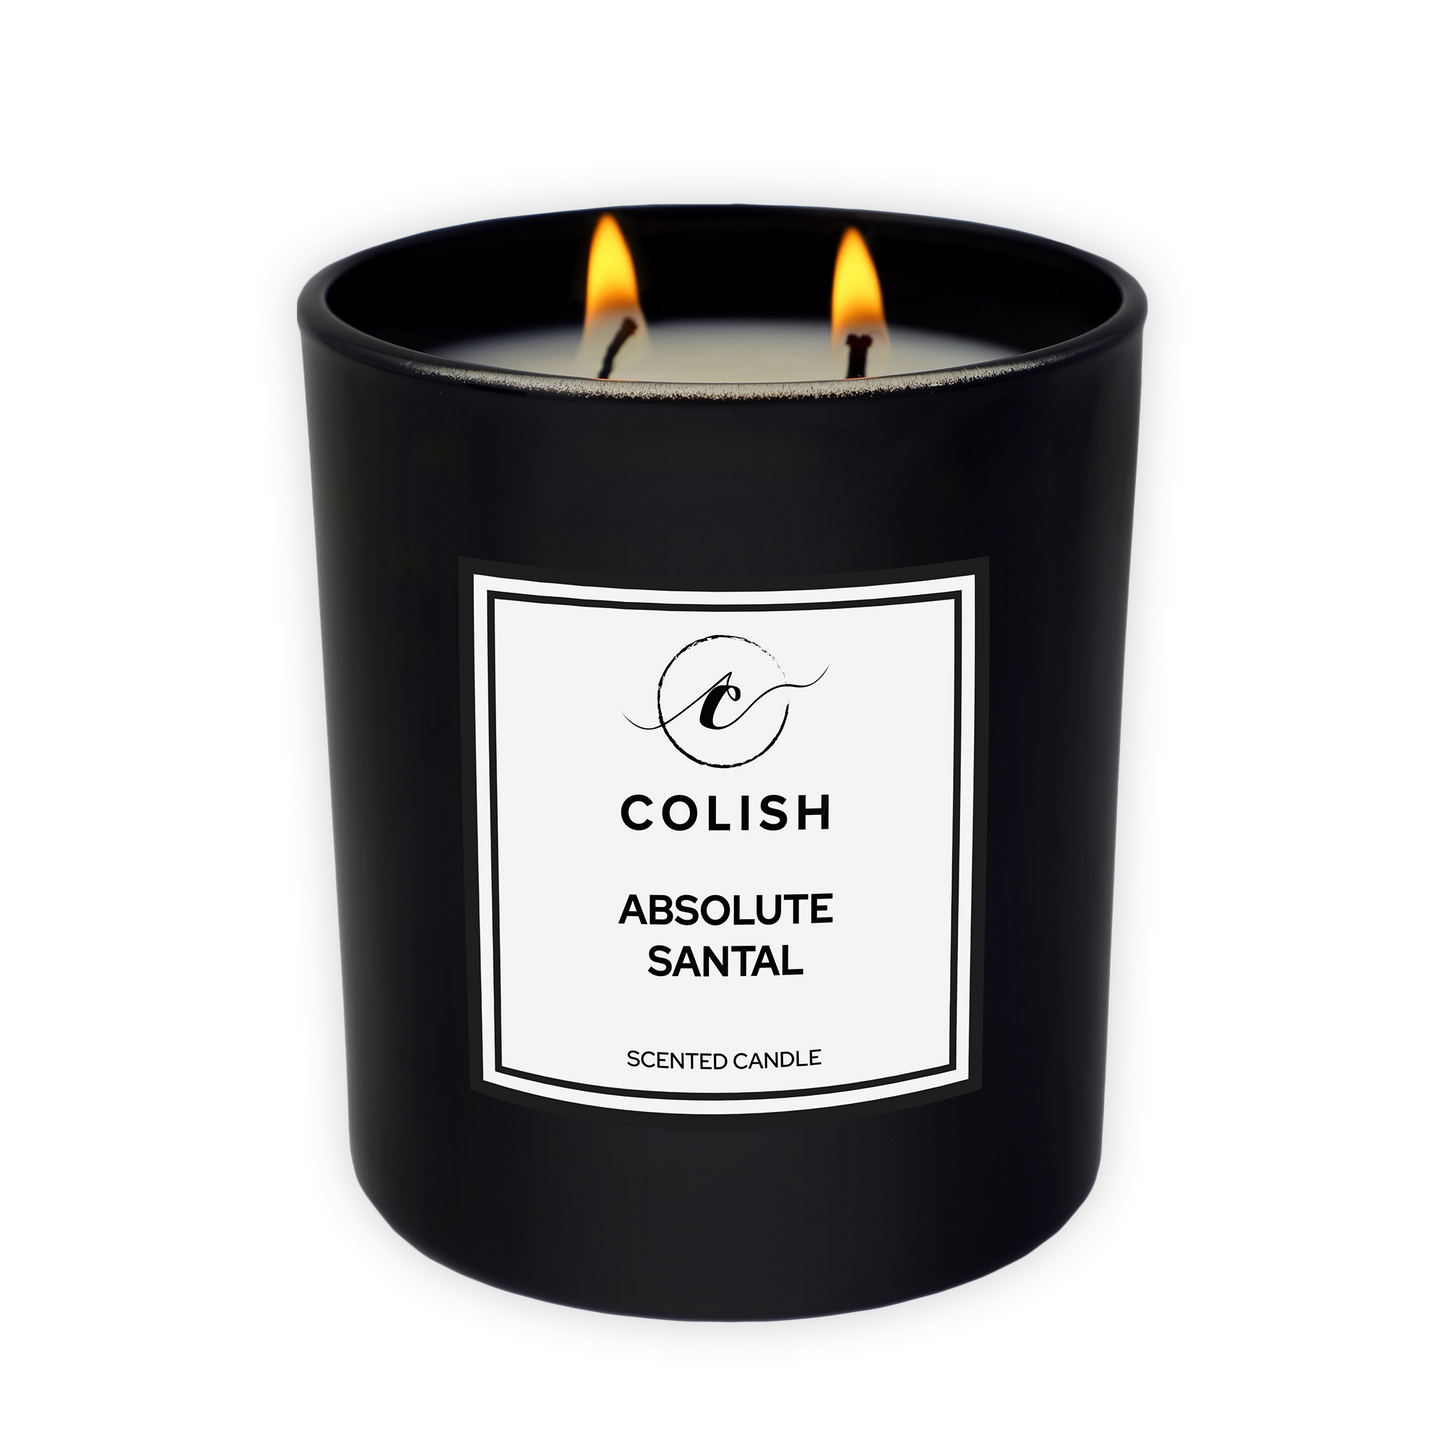 ABSOLUTE SANTAL SCENTED CANDLE